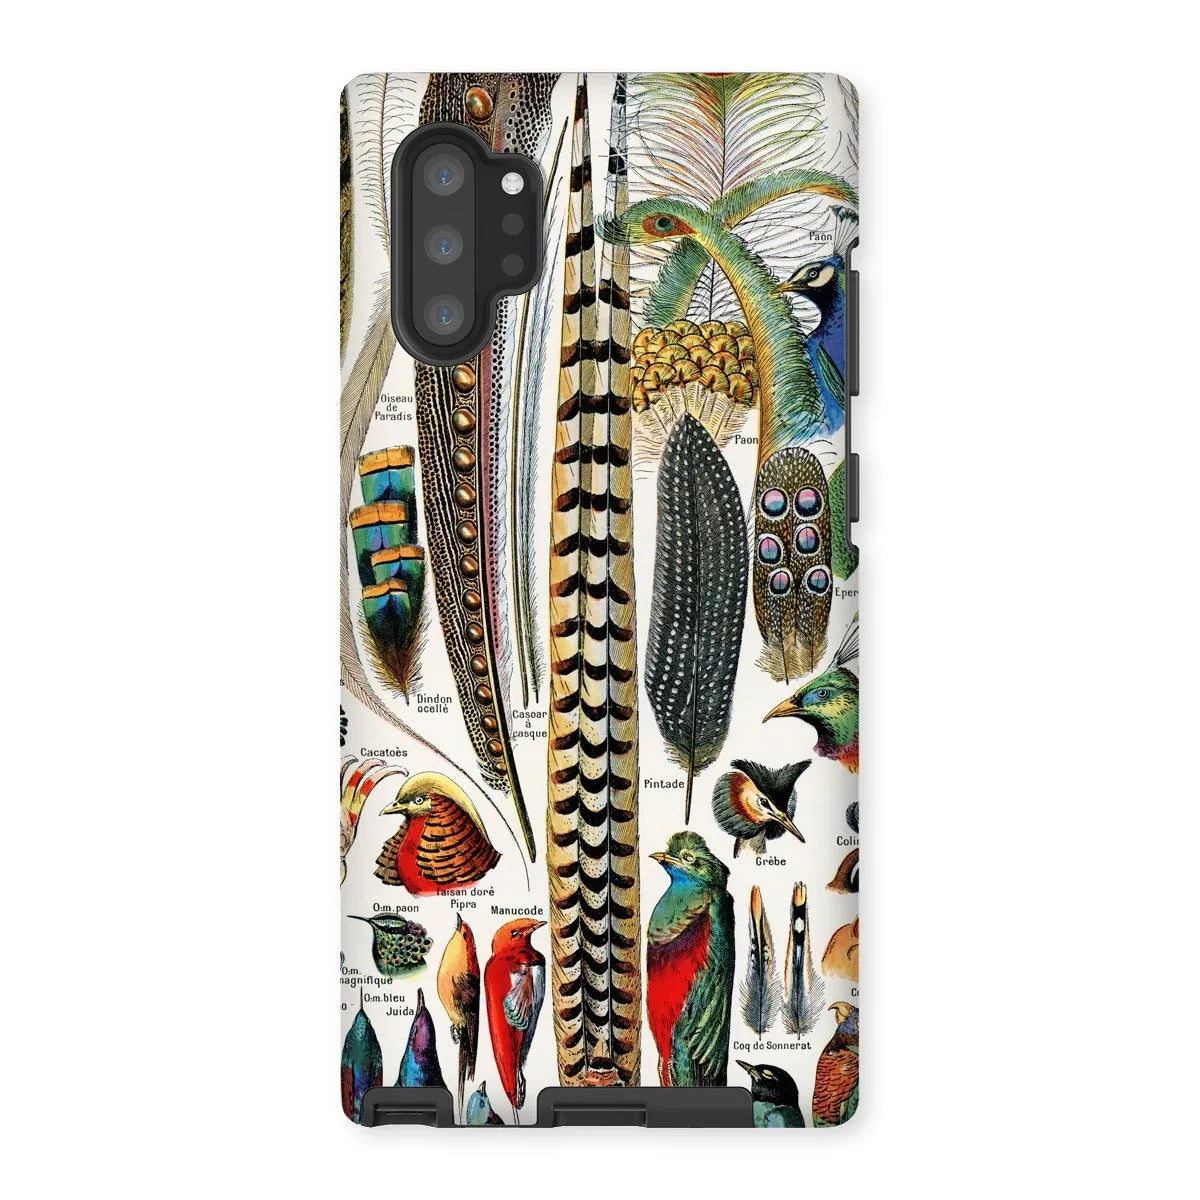 Plumes - Feathers By Adolphe Millot Tough Phone Case - Samsung Galaxy Note 10p / Matte - Aesthetic Art